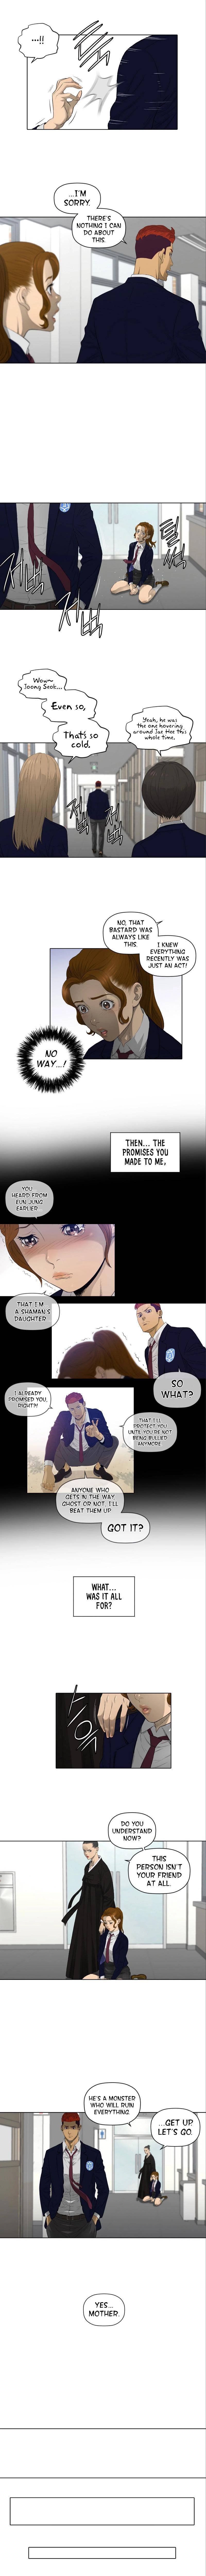 second-life-of-a-gangster-chap-34-3